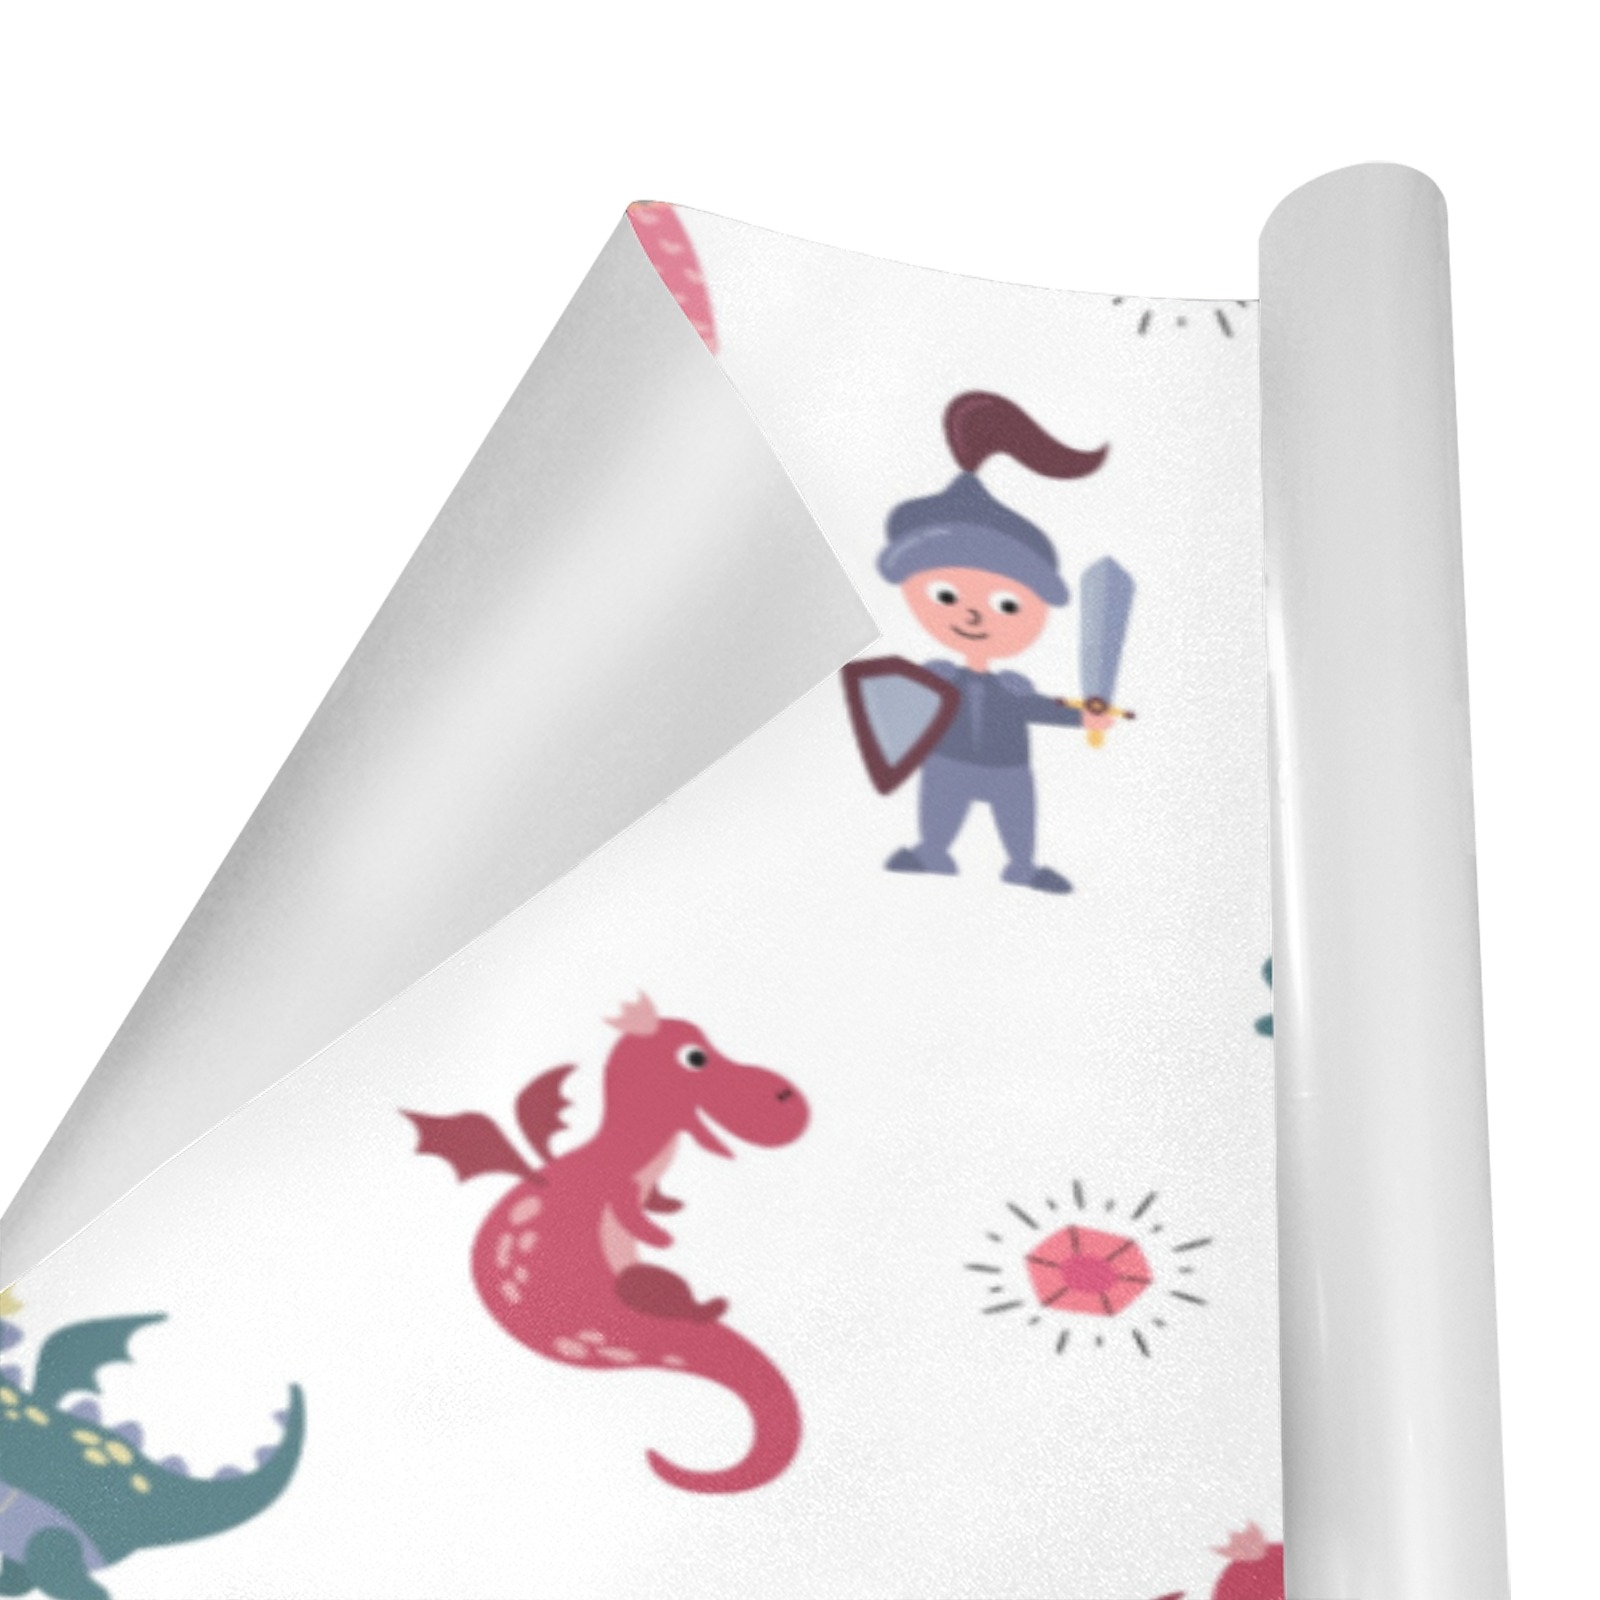 Kids Knight And Dragon Pattern Gift Wrapping Paper 58"x 23" (1 Roll)